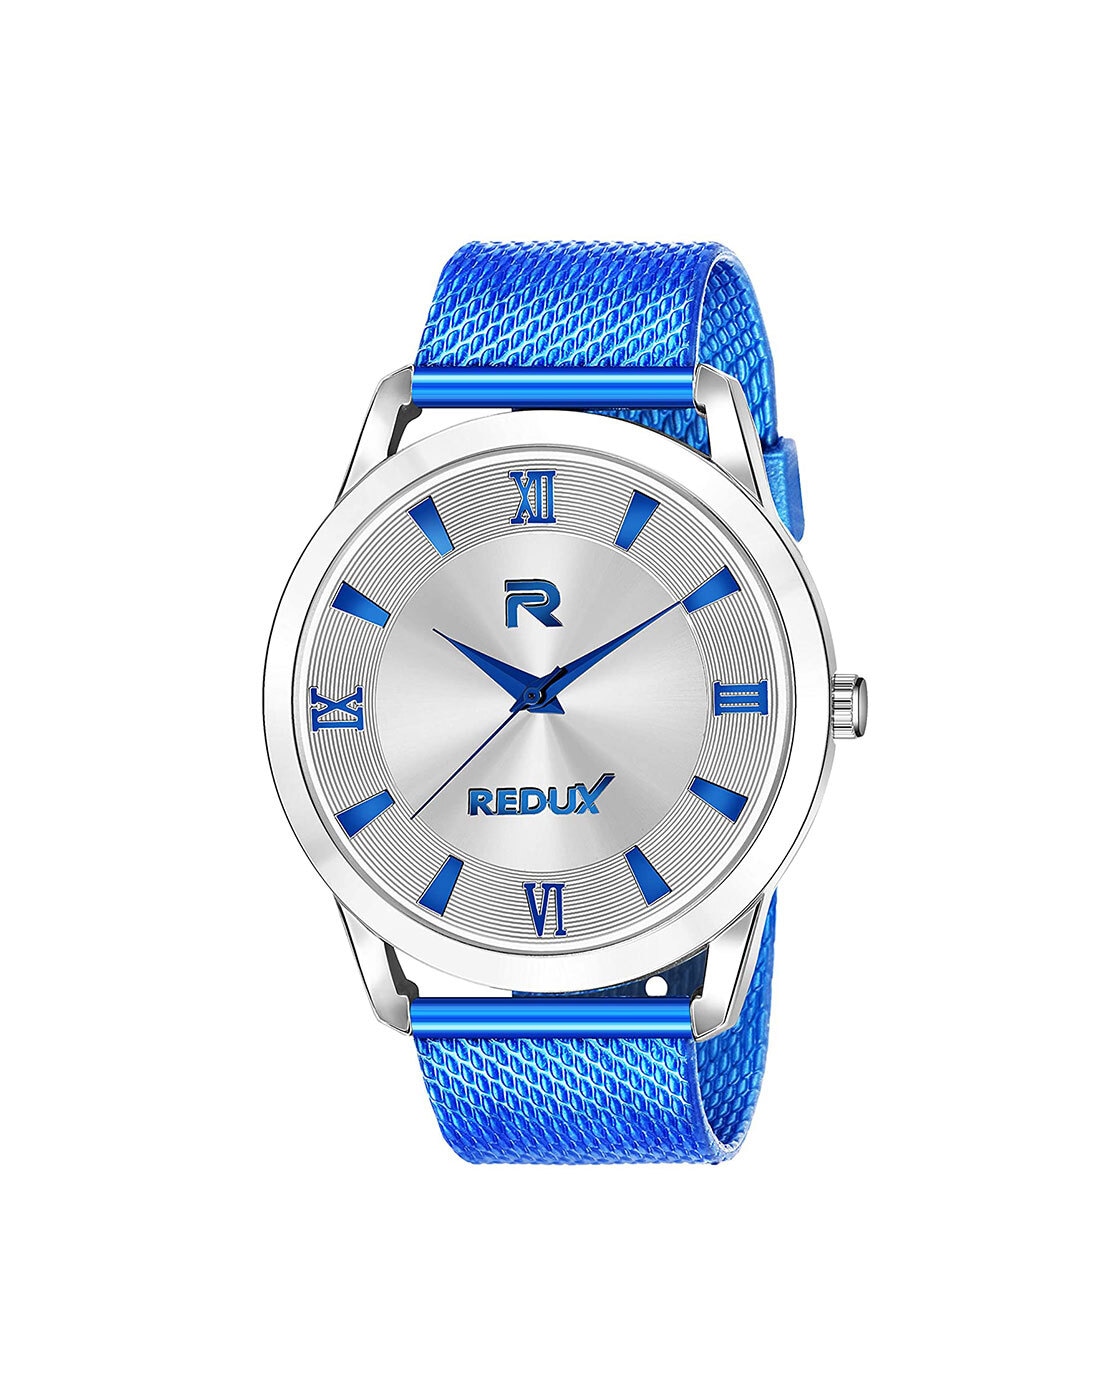 REDUX RWS0015S Analogue Watch with Stainless Steel Strap | Dealsmagnet.com